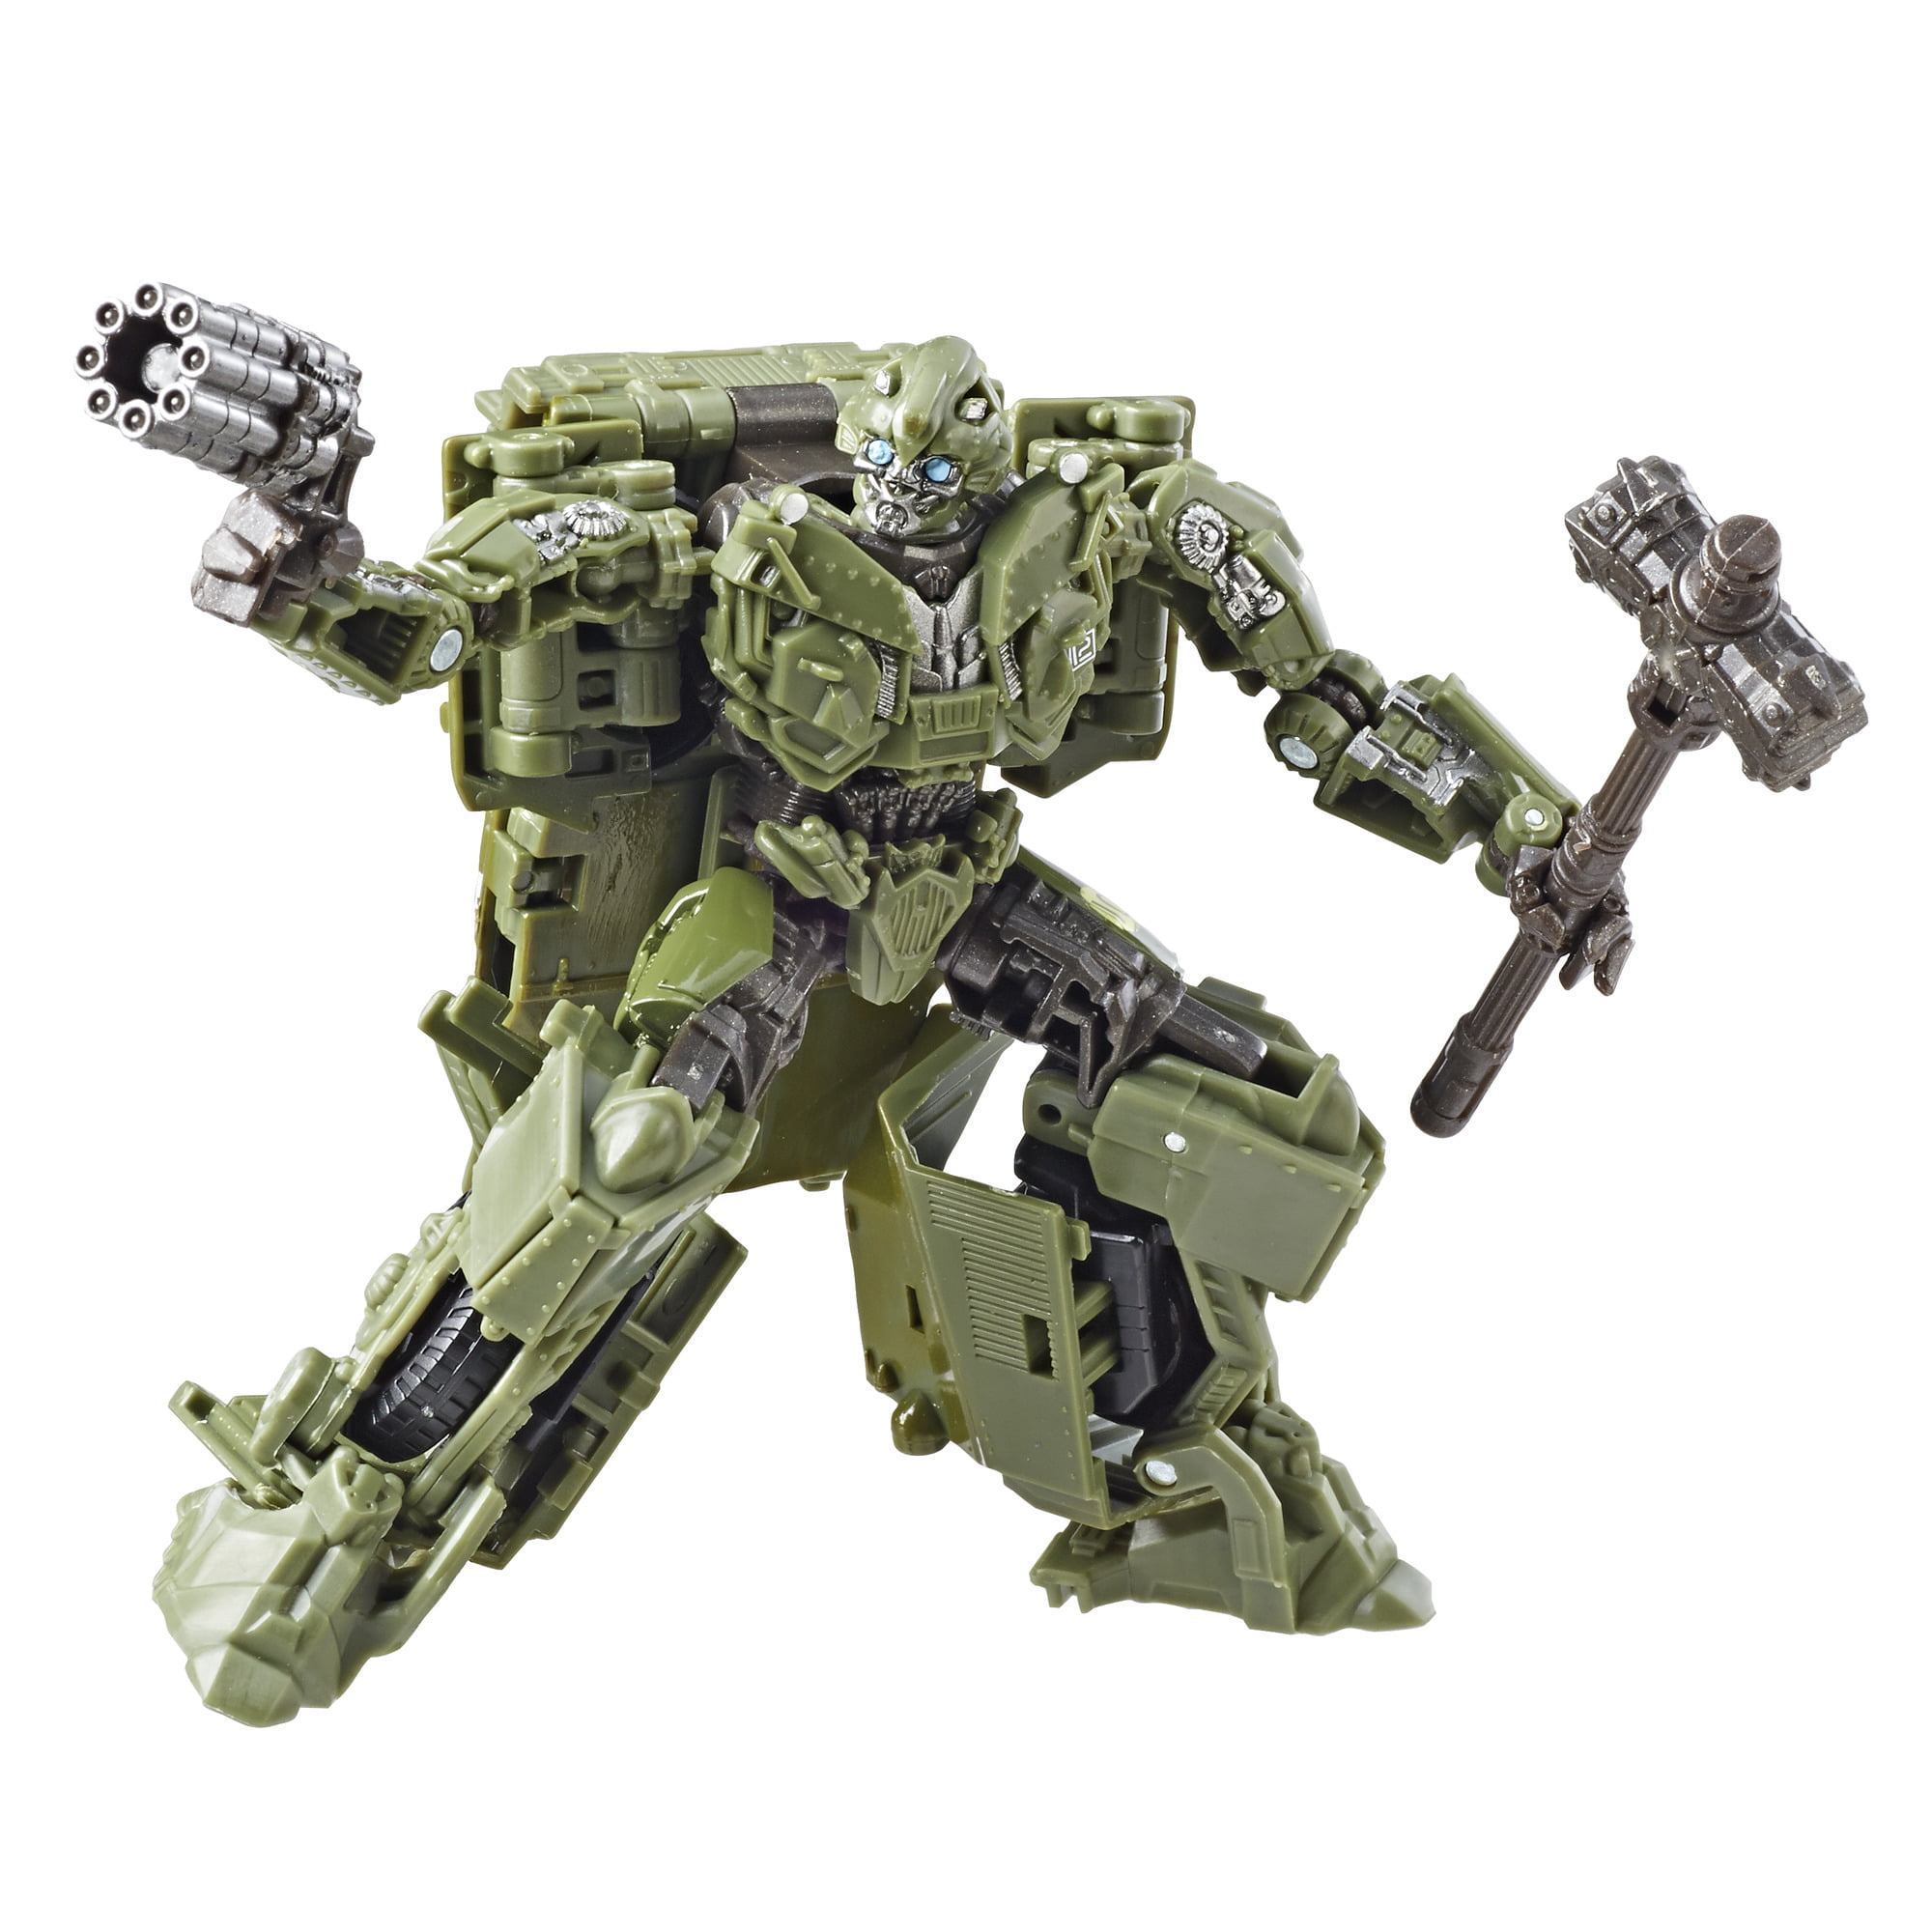 Details about   Transformers Studio Series 34 Leader Class Dark of the Moon Megatron & Igor Fig. 